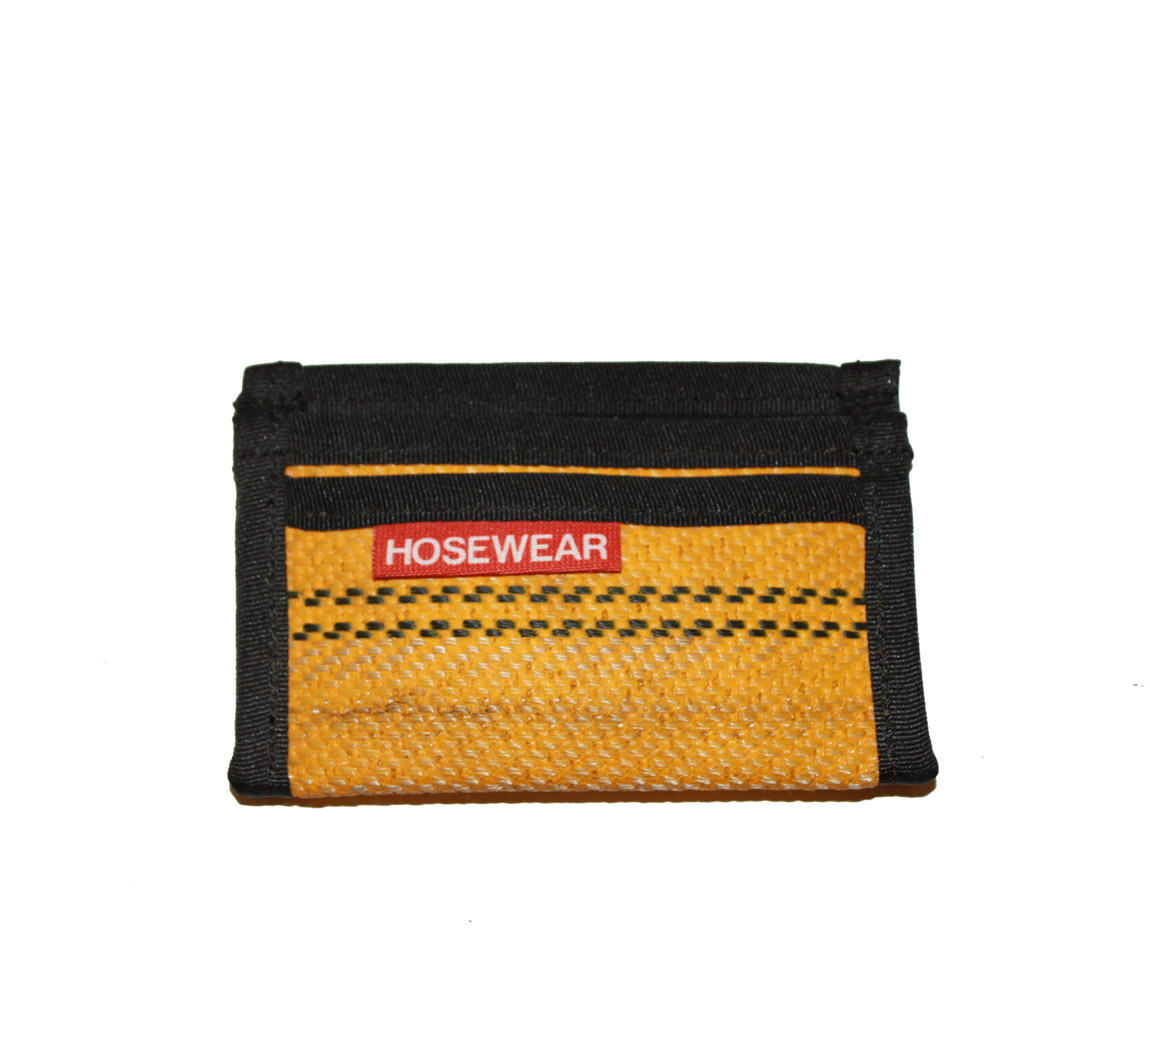 Portefeuille The Ho wallet 